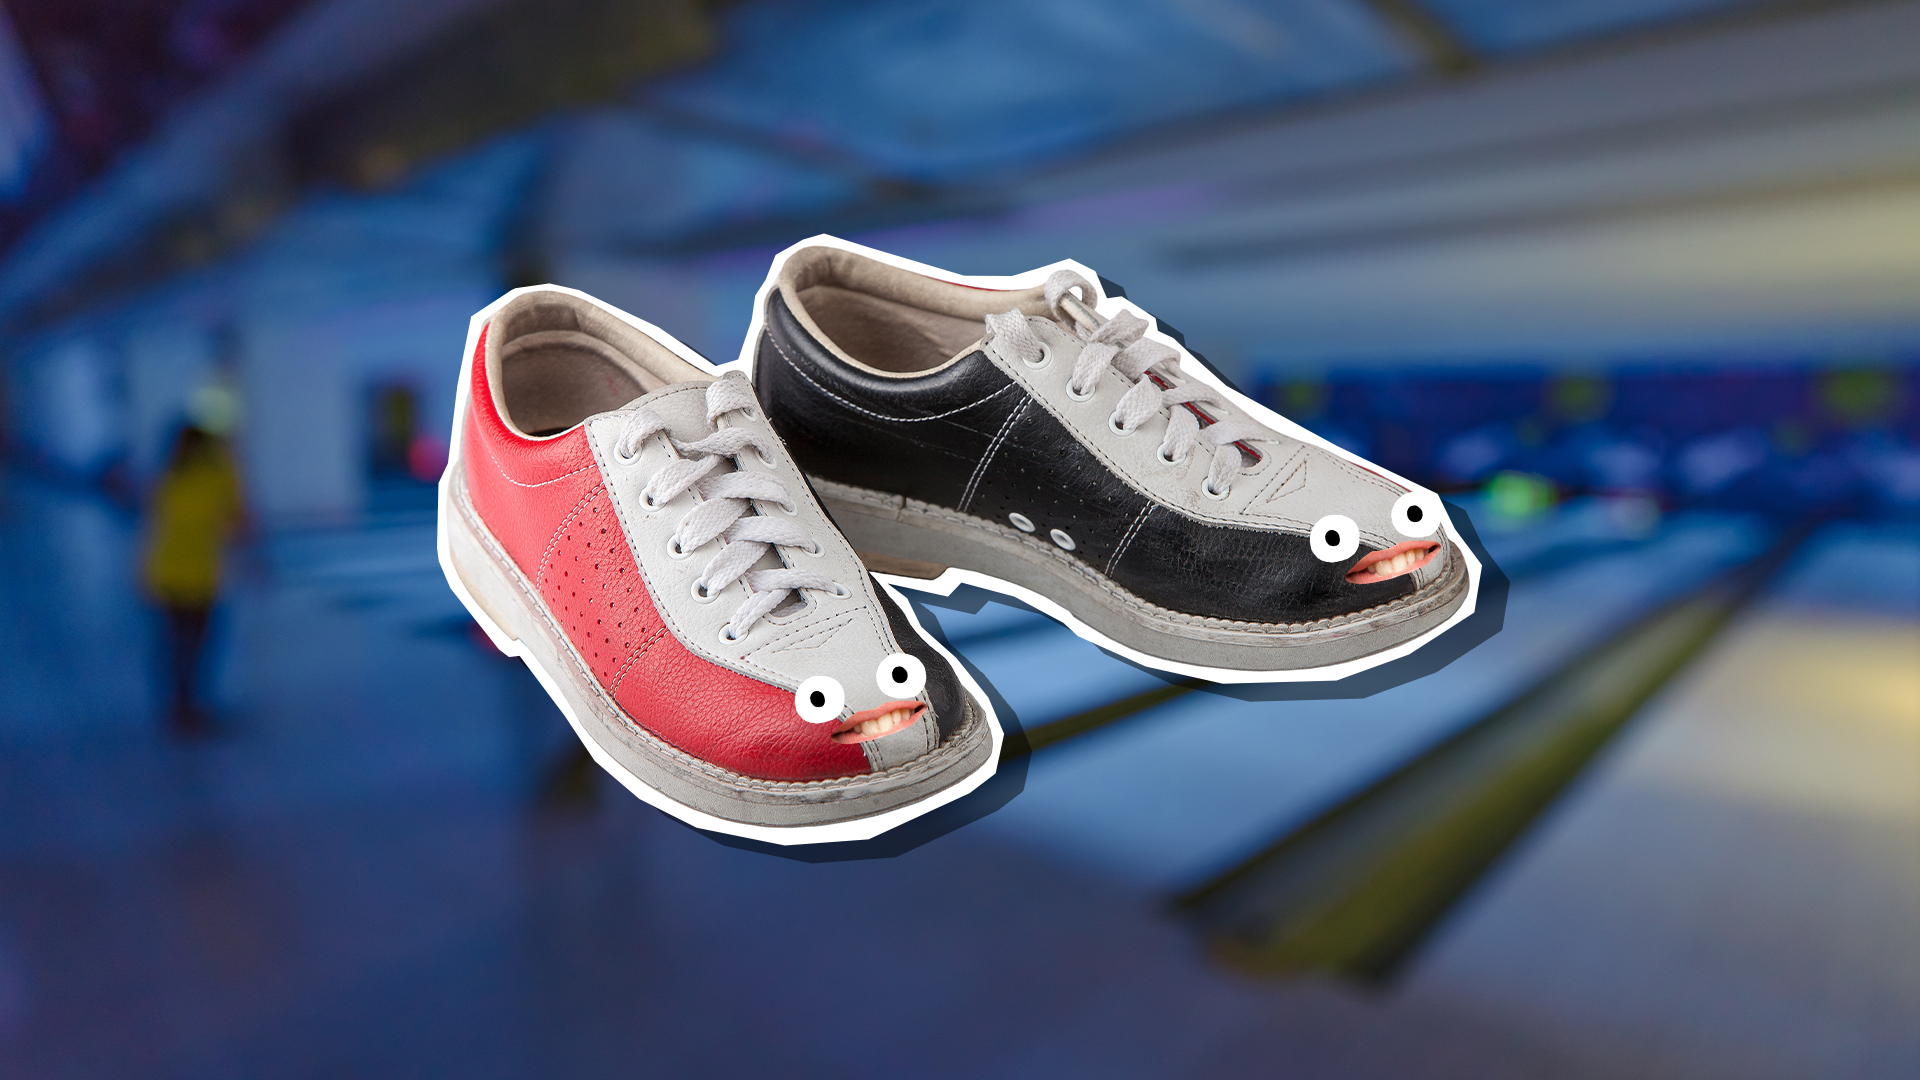 A pair of bowling shoes